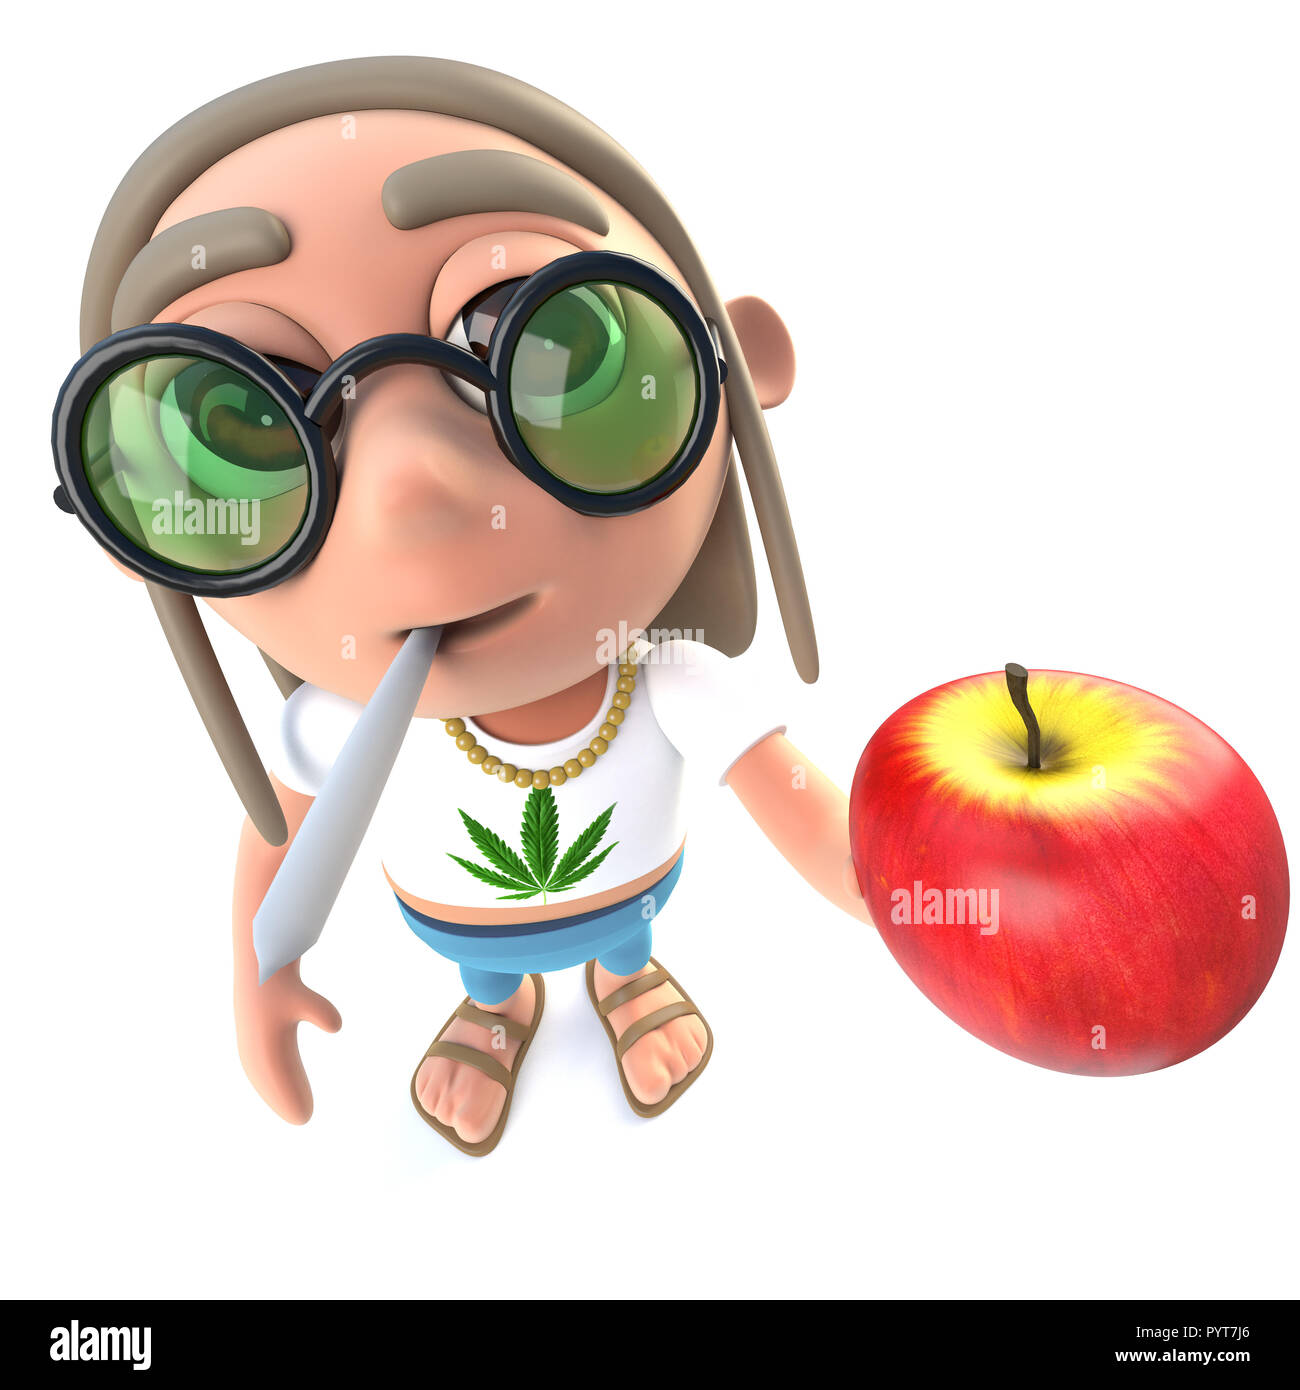 3drender of a funny cartoon stoner hippy character holding a juicy red apple and smoking Stock Photo